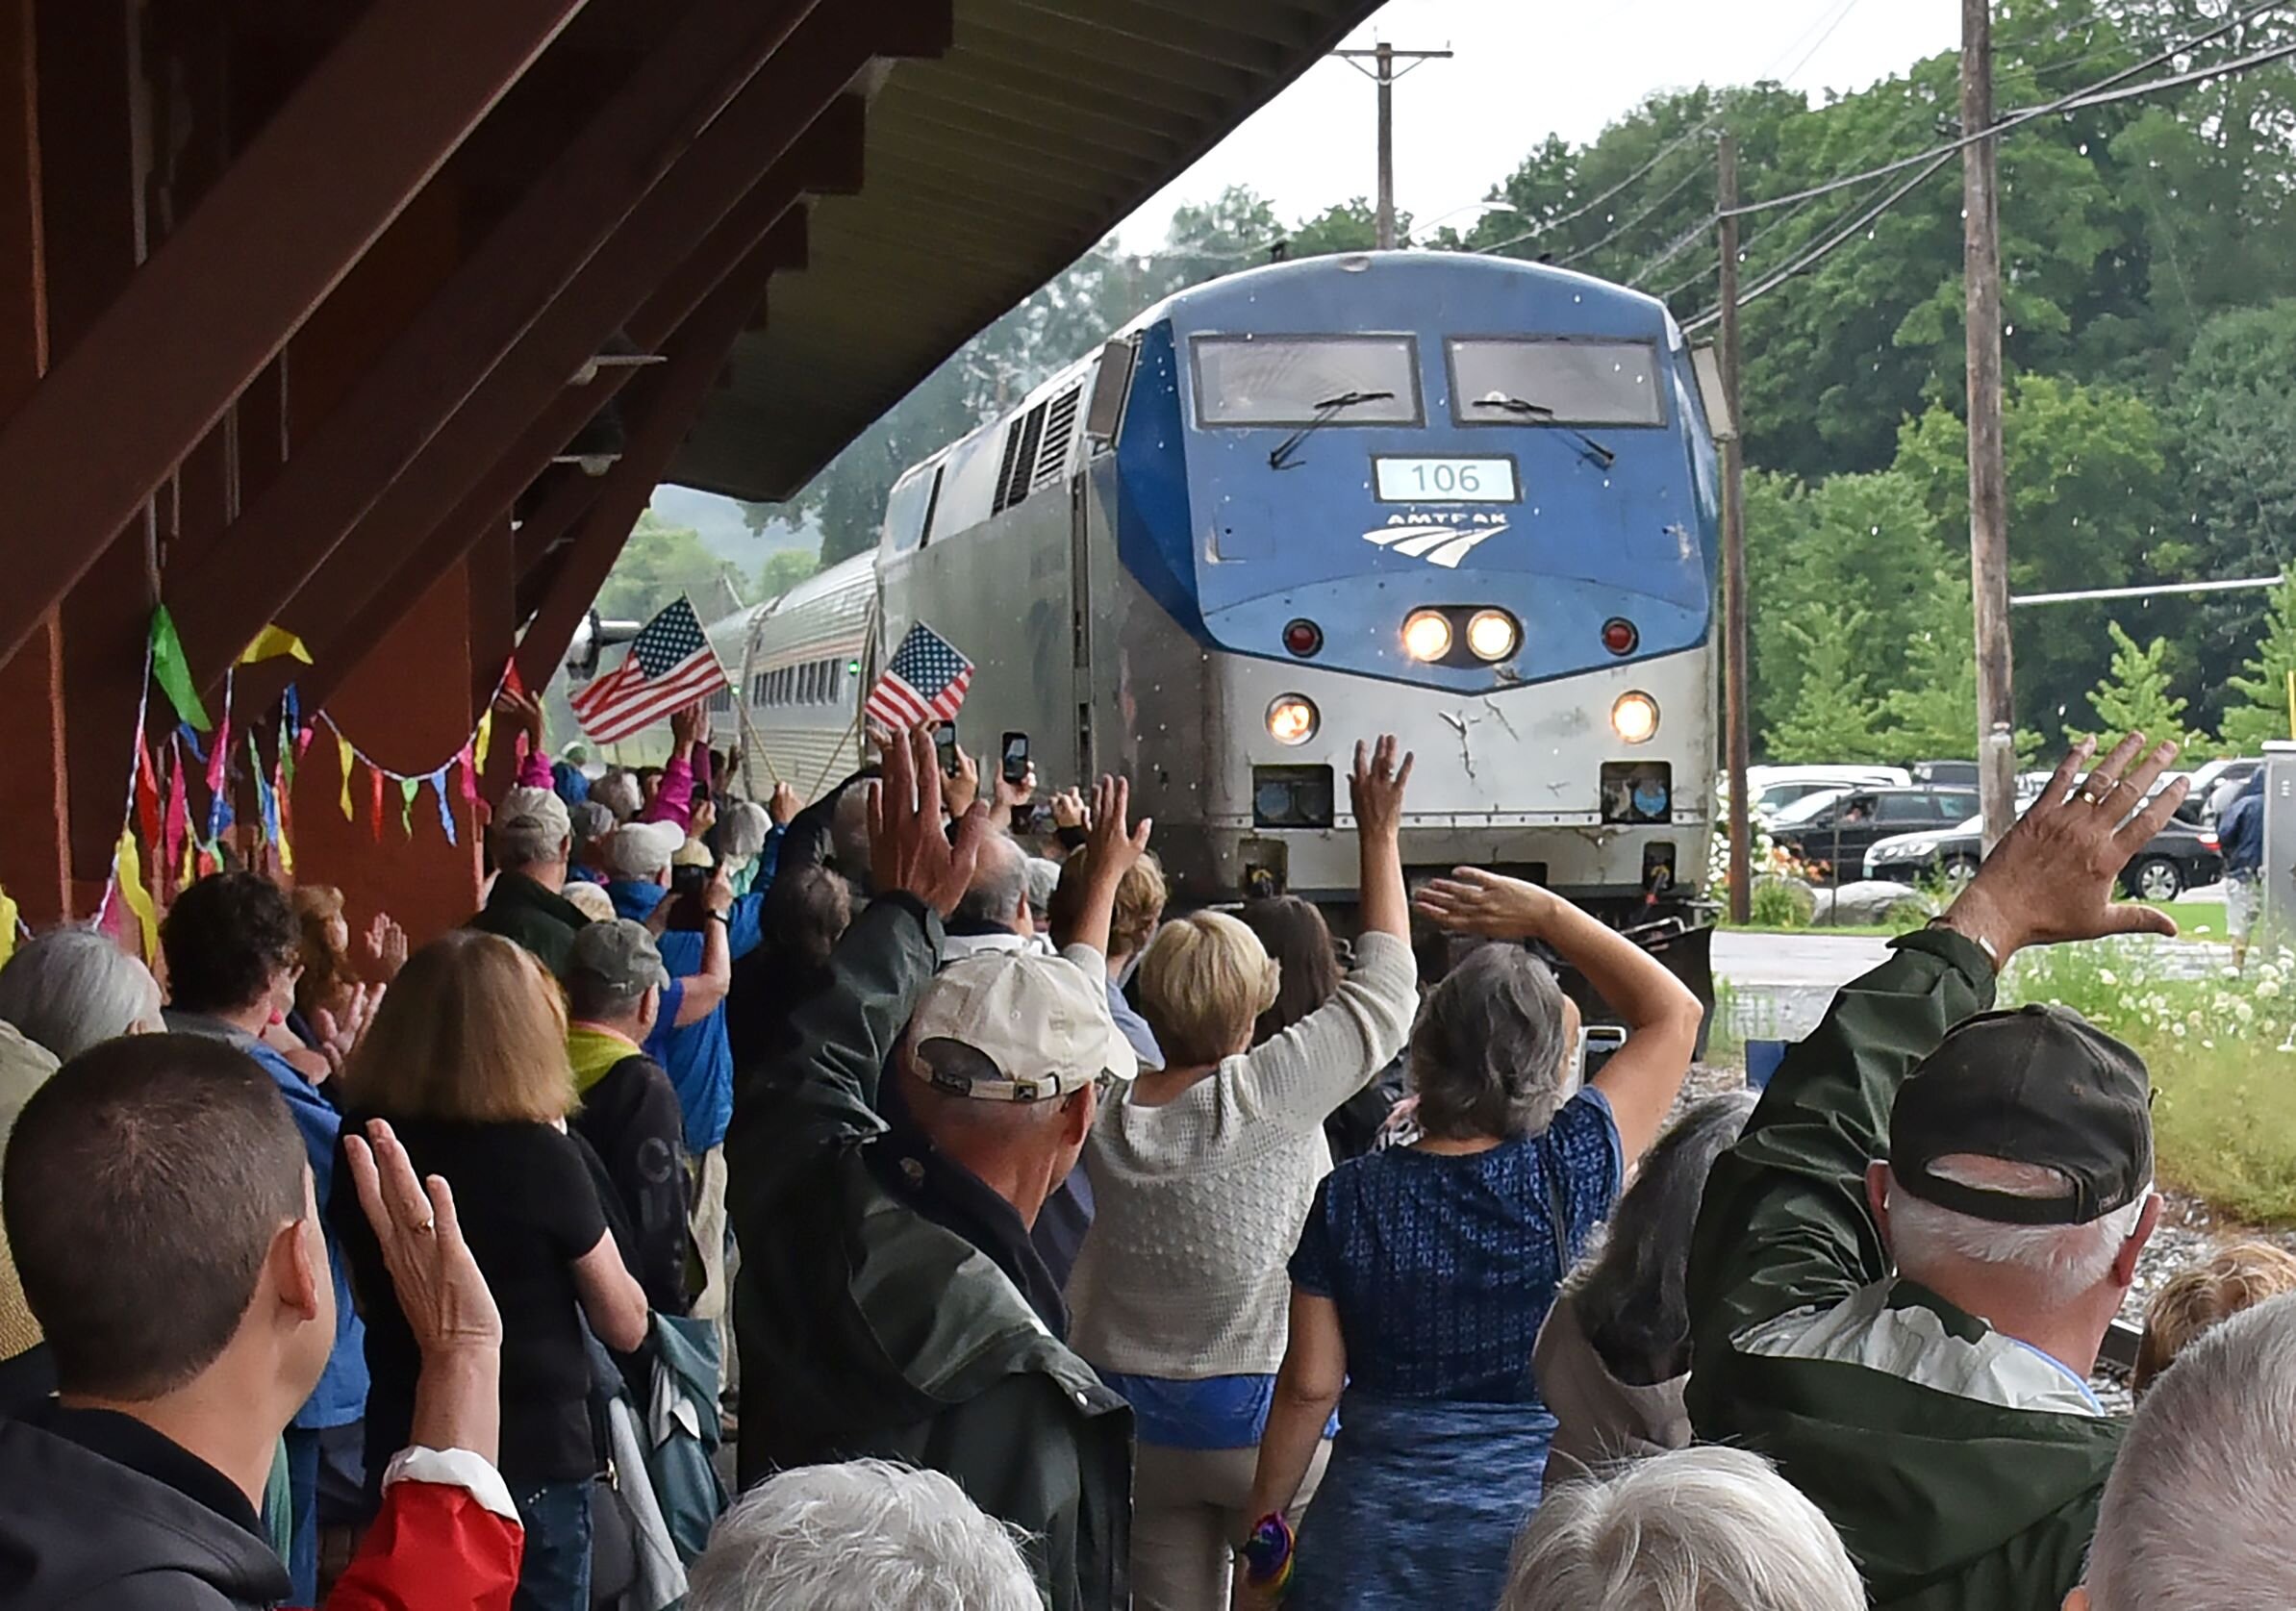   The crowd cheers and waves from the platform at the Waterbury Train Station Monday morning as Amtrak's Vermonter pulls in for its first stop in over a year as passenger train service in Vermont resumes. Photo by Gordon Miller  